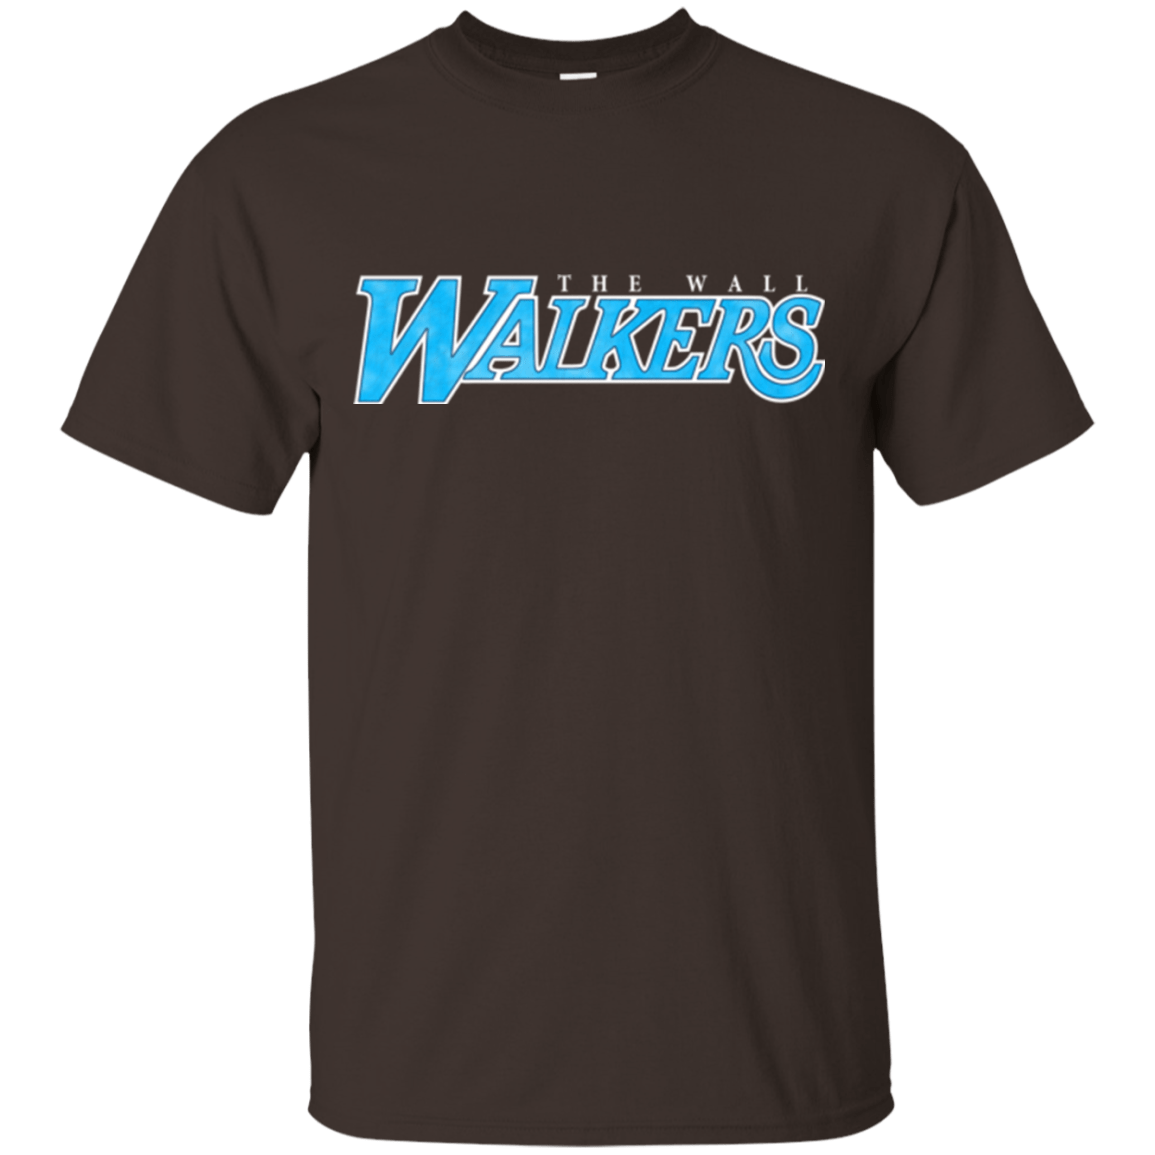 T-Shirts Dark Chocolate / Small The Wall Walkers T-Shirt